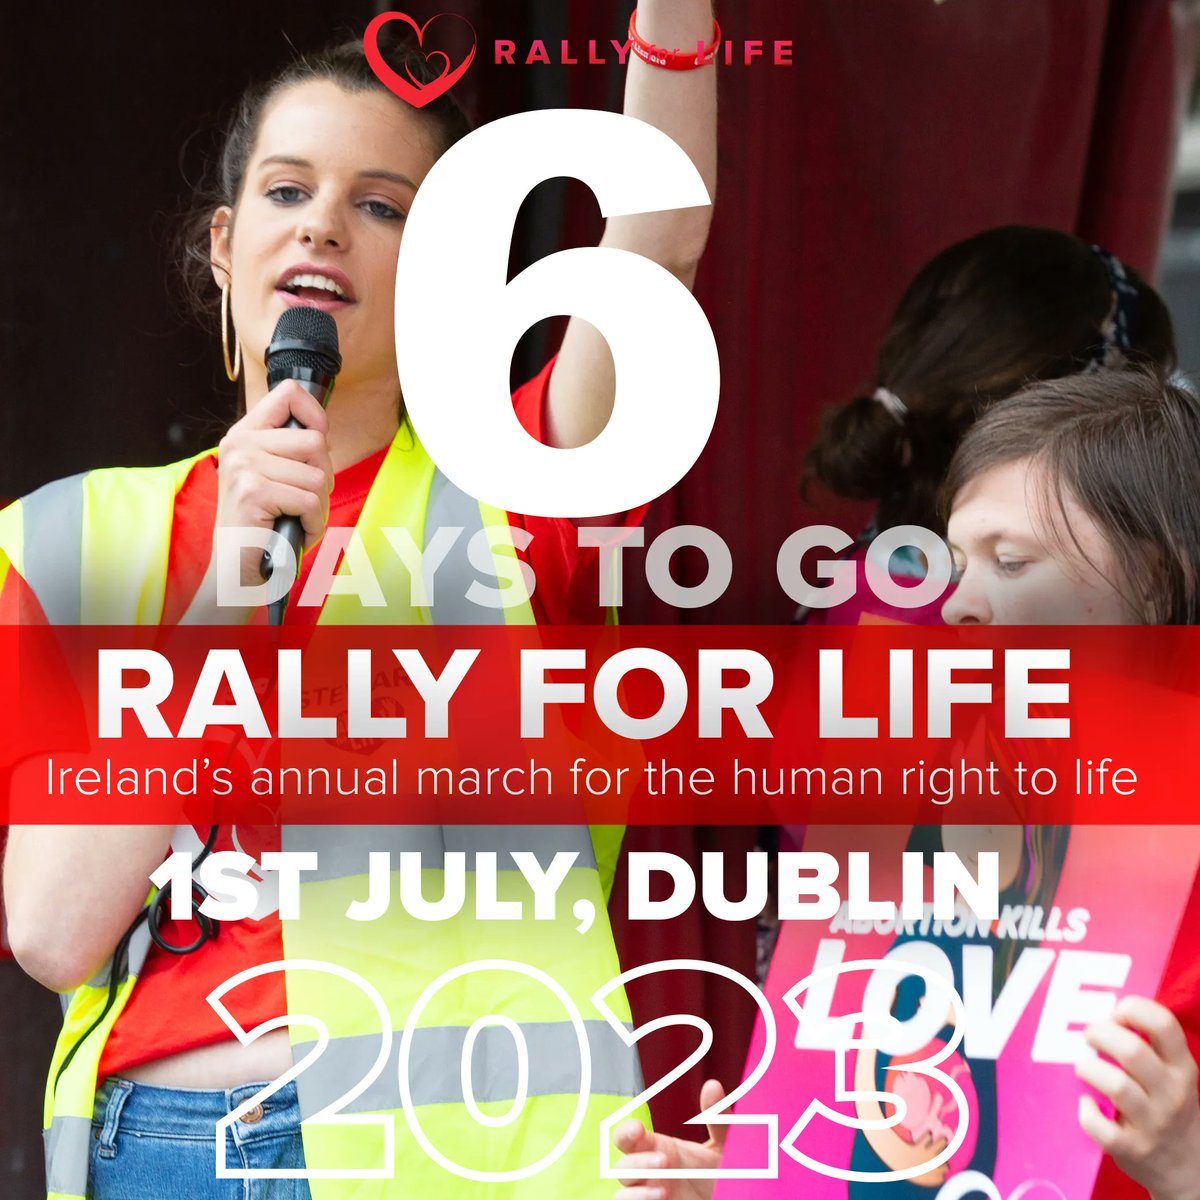 JUST 6 DAYS TO GO until we Rally for Life in Dublin. Make sure you join us on Saturday as we march in defence of the right to life for the unborn!

#StopAbortingOurFuture #RallyforLife #WhyWeMarch